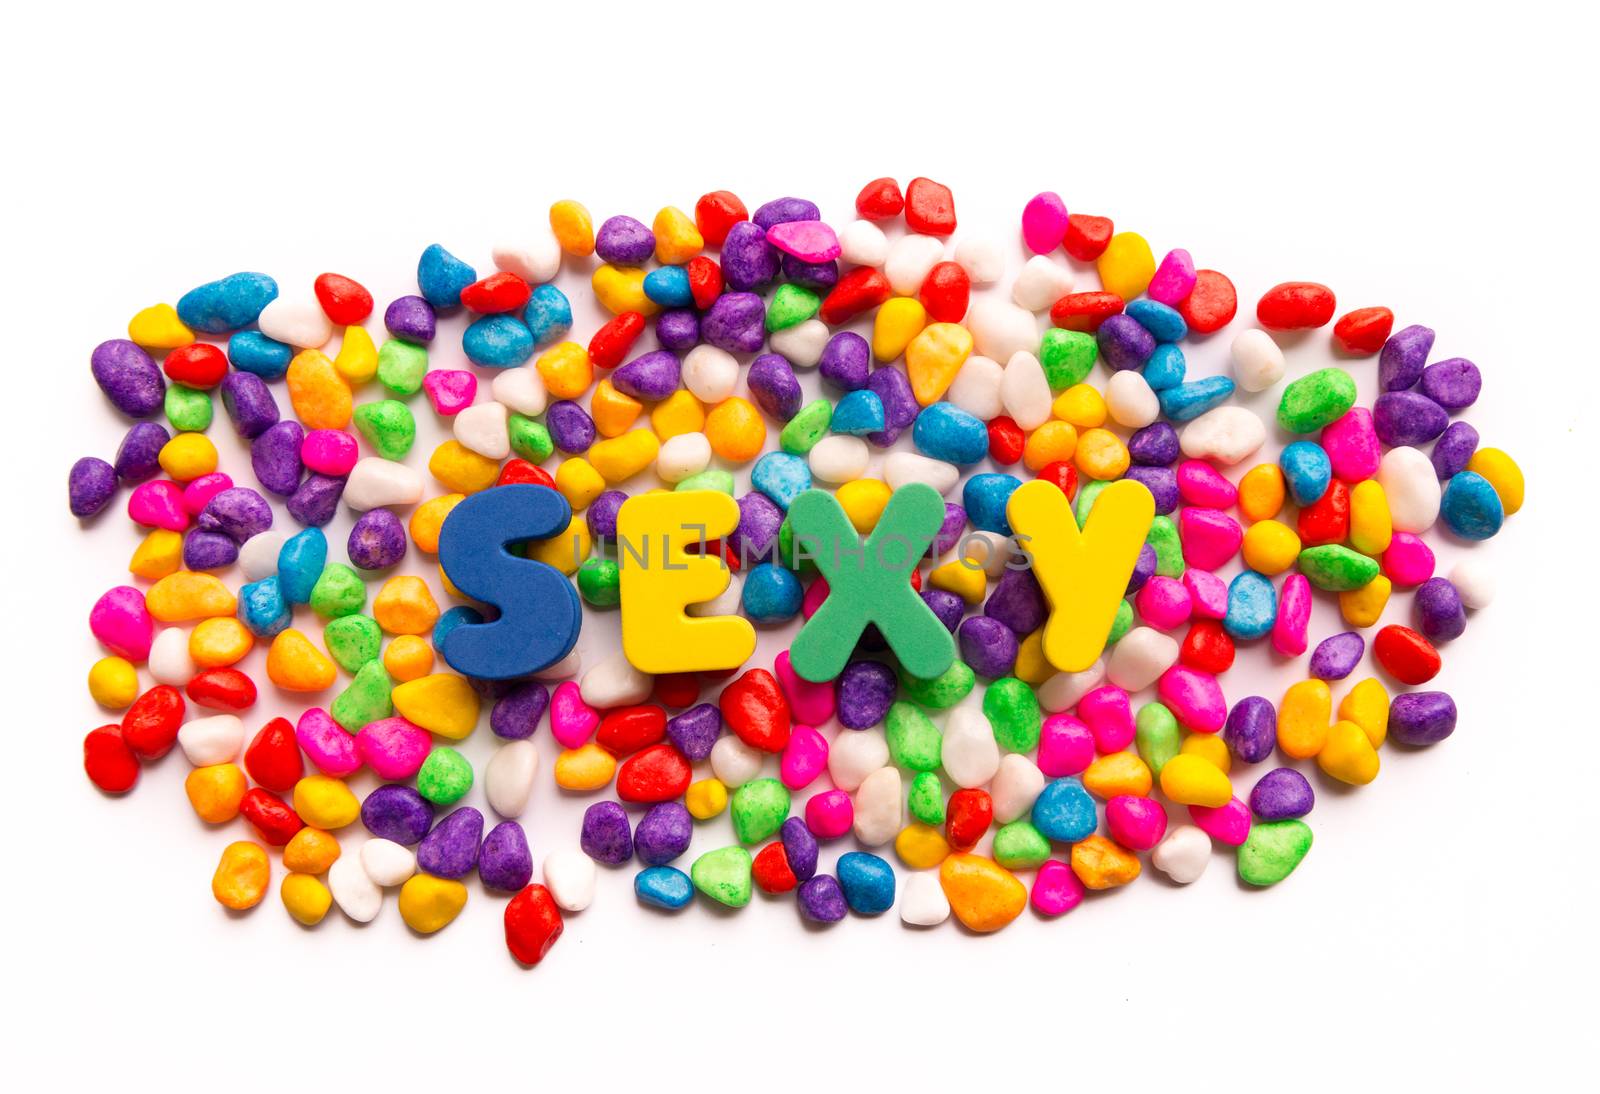 SEXY word in colorful stone by sohel.parvez@hotmail.com